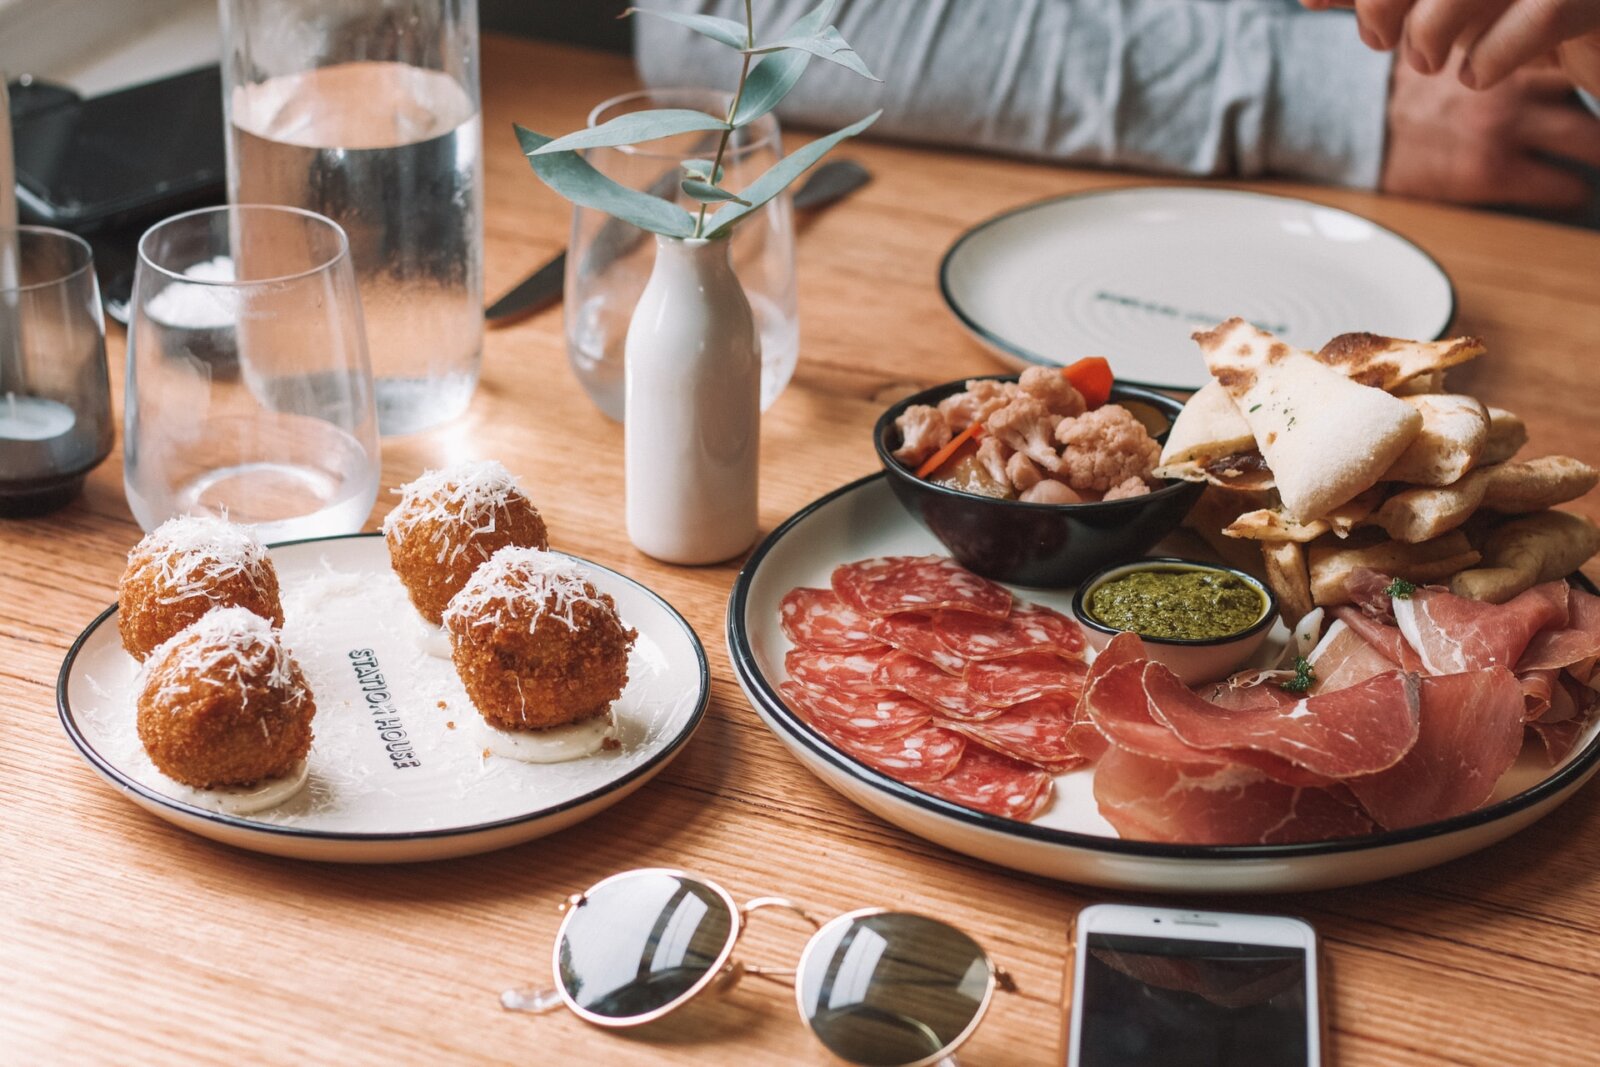 Groupon is offering the chance to win free tapas if your Spain holiday has been cancelled, The Manc